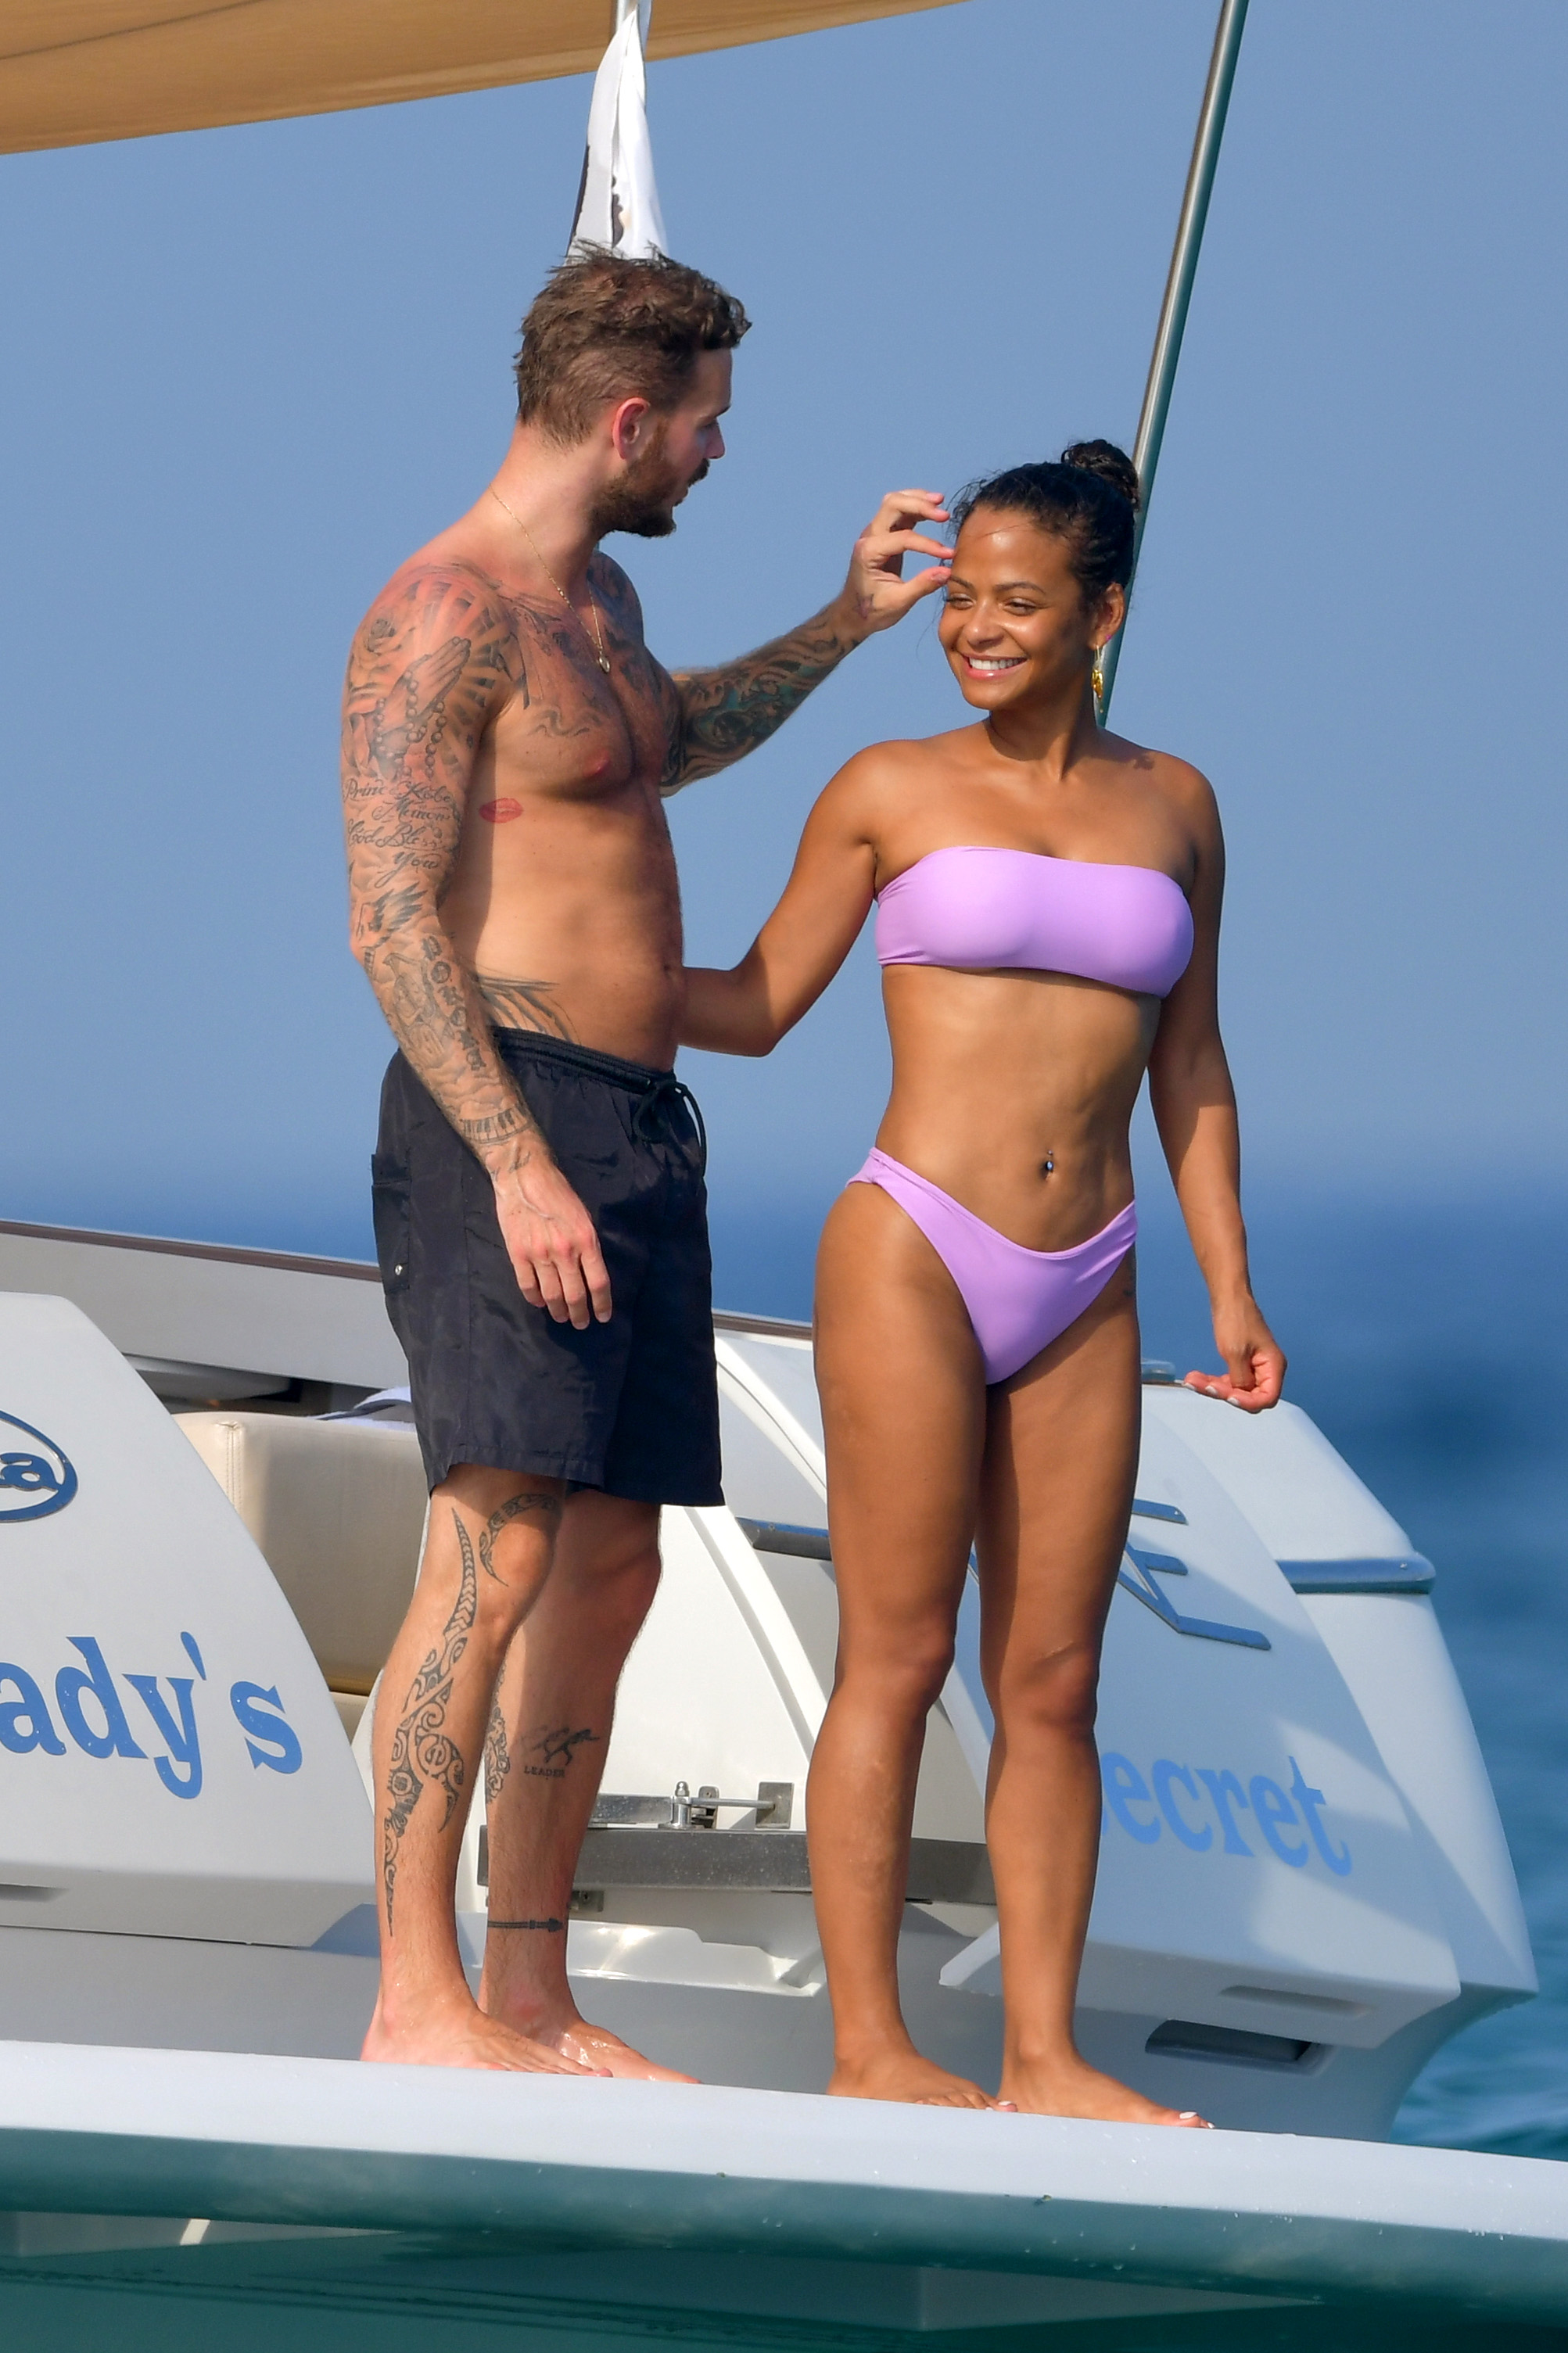 Christina Milian pokies and cameltoe in sexy bikini candids on a boat during holiday UHQ (20).jpg